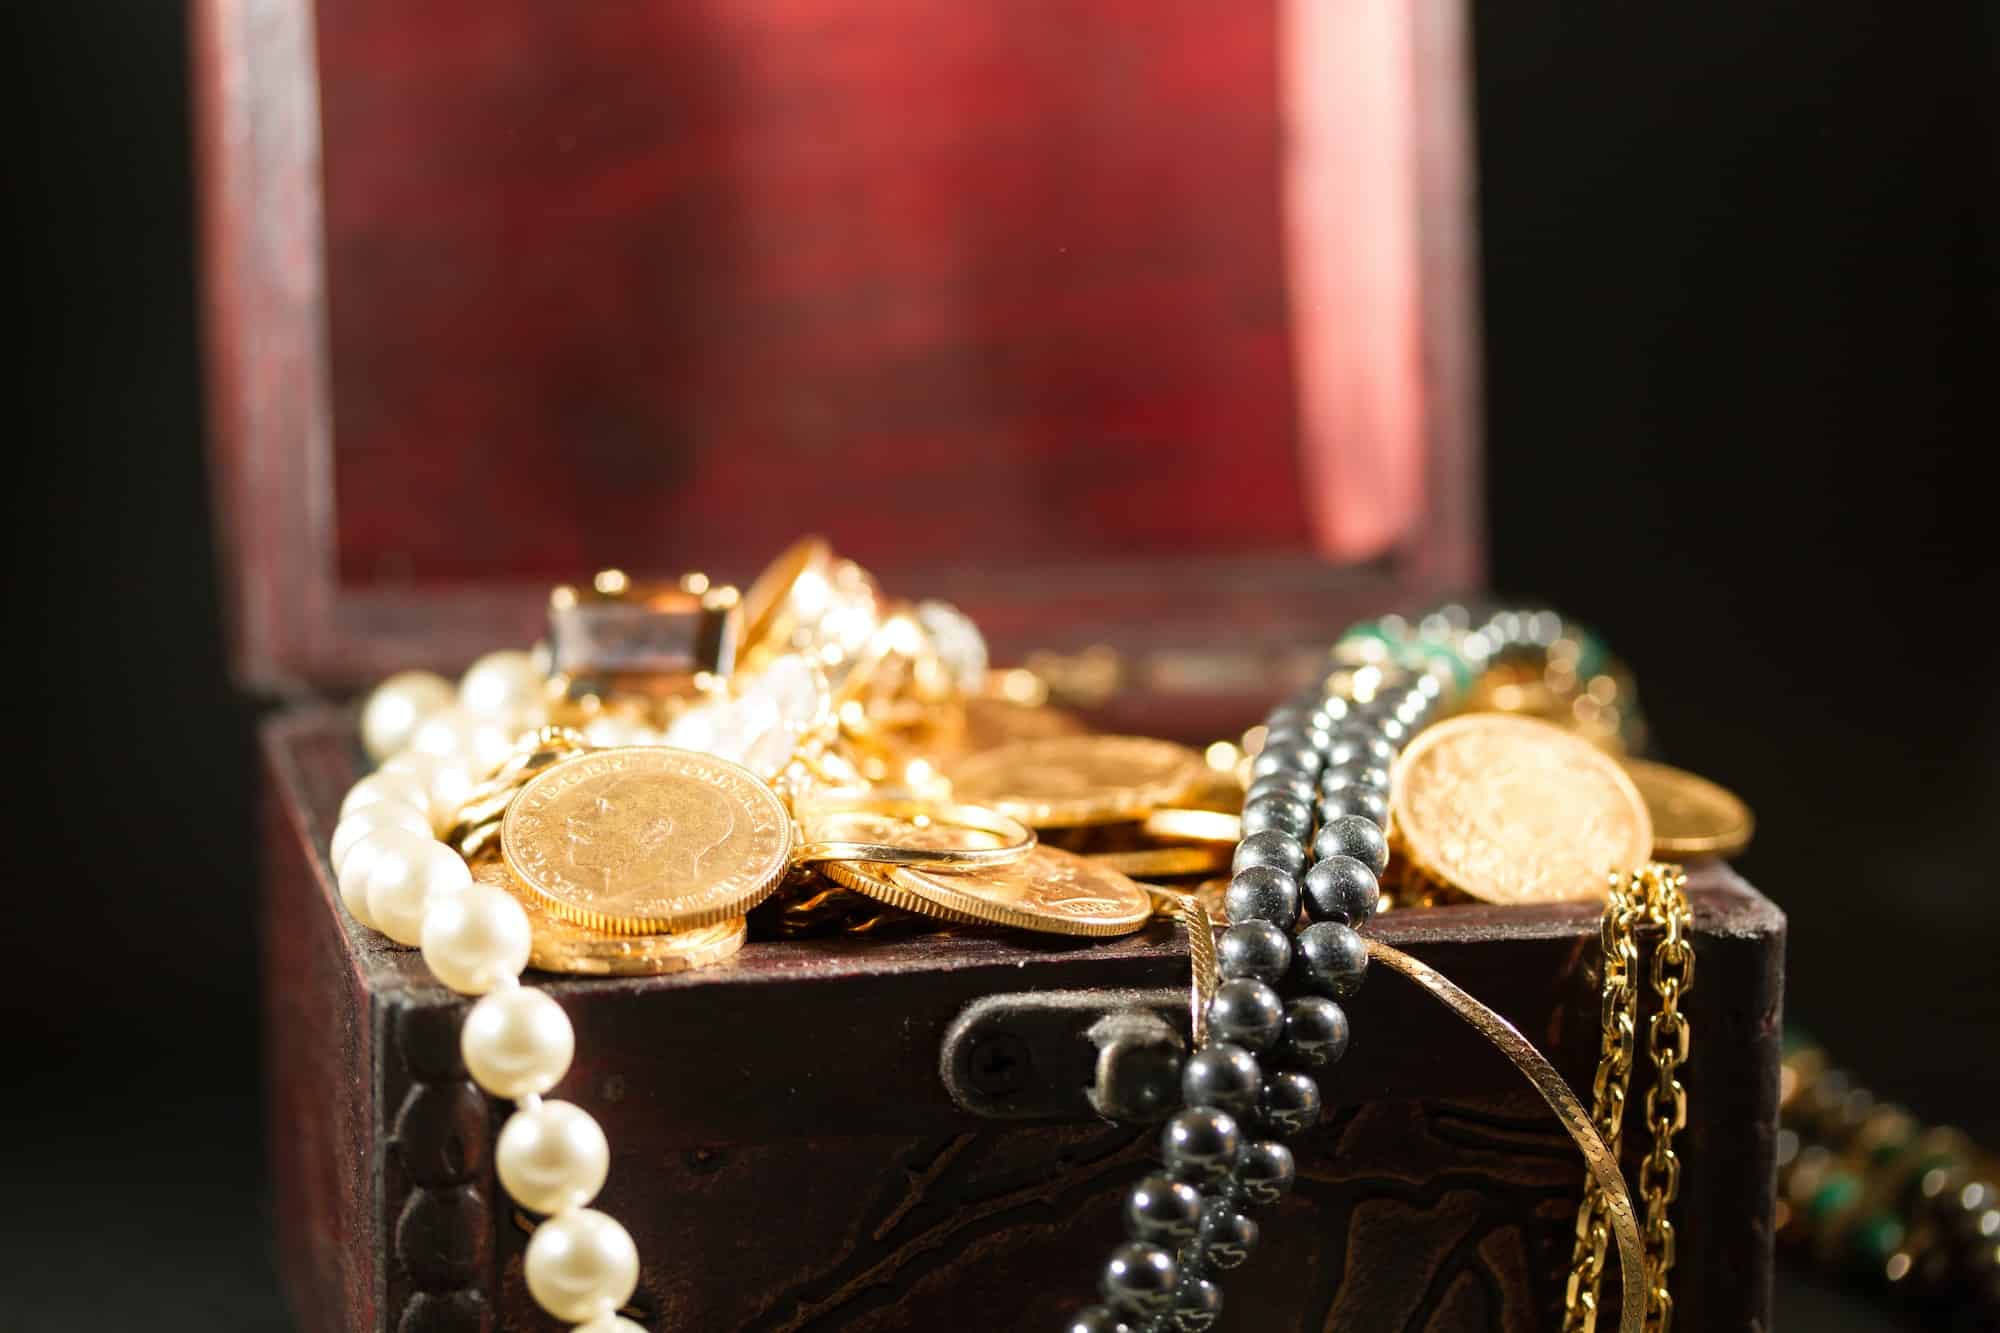 Jewels and gold coins